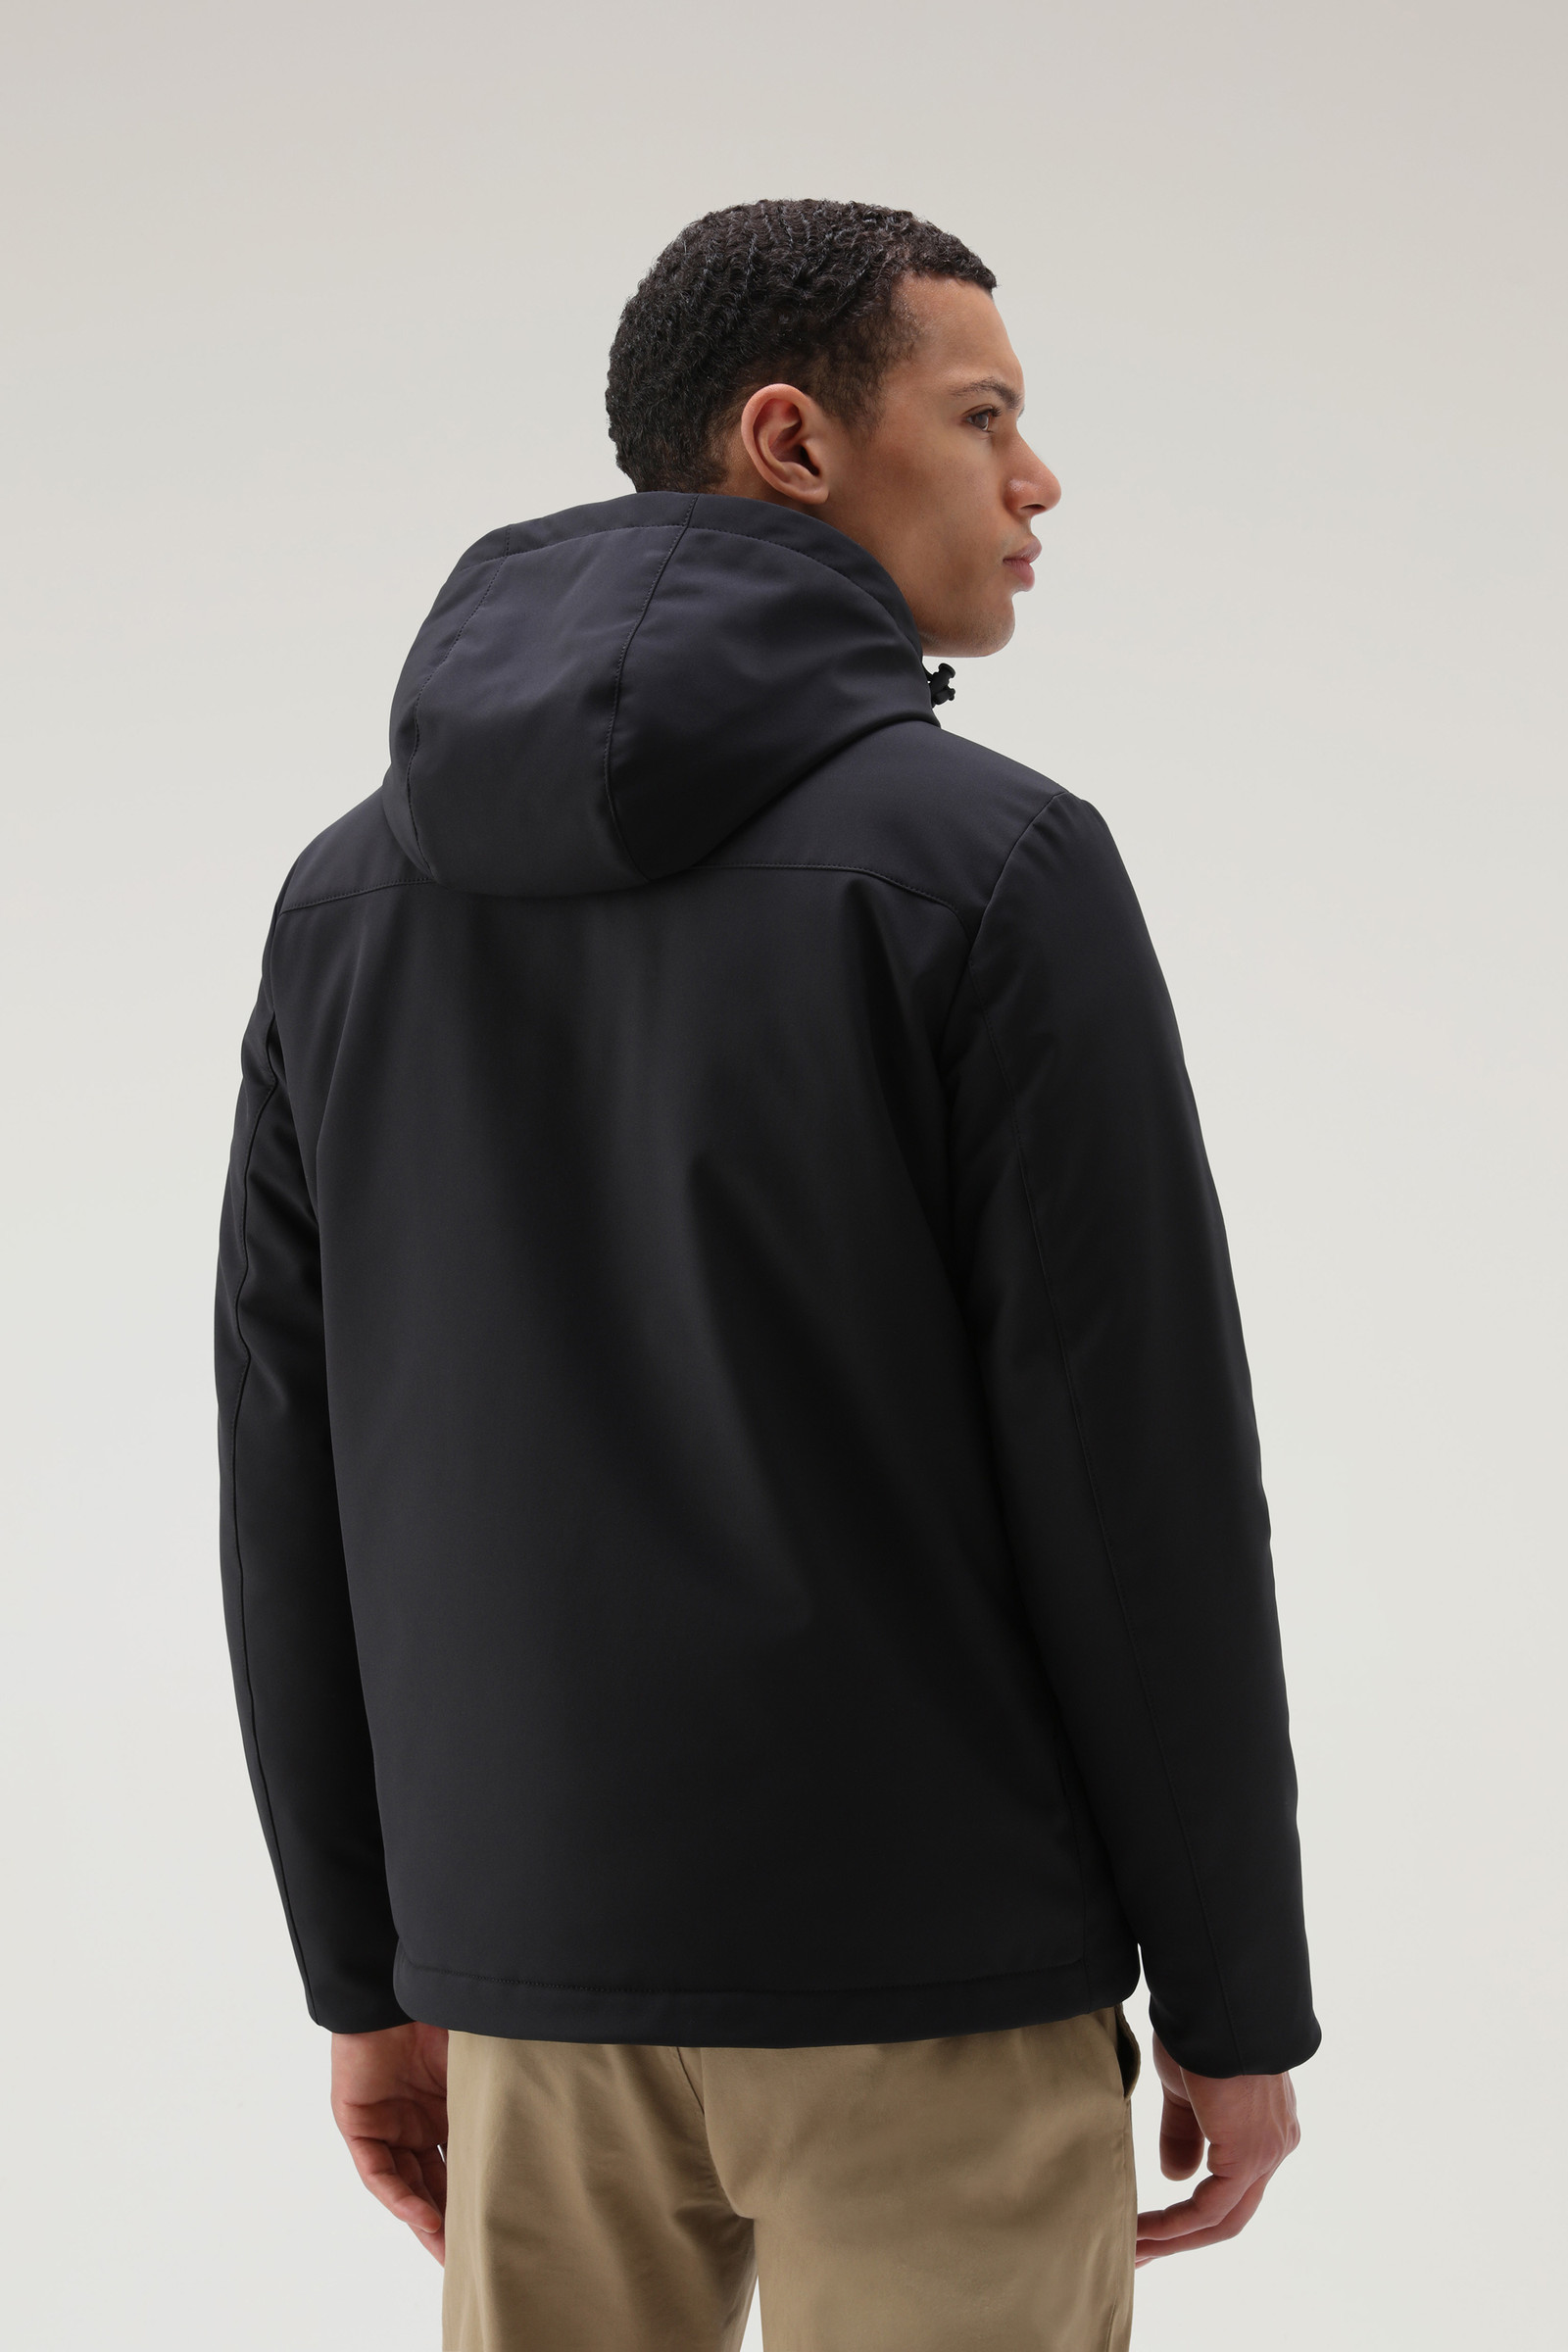 Pacific Softshell Jacket Black | Woolrich USA